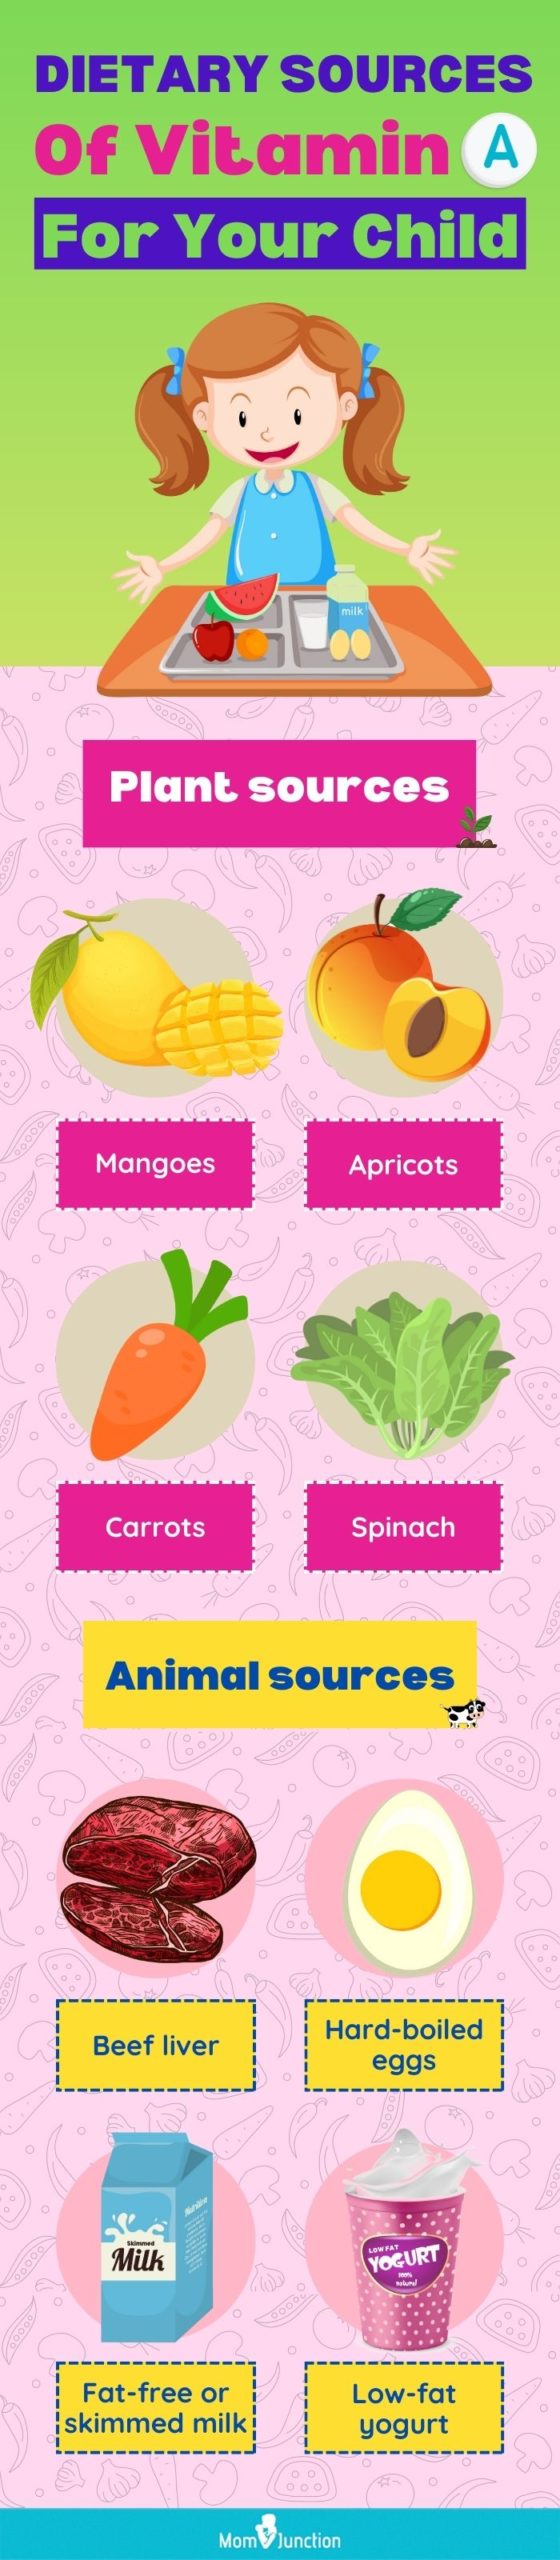 dietary sources of vitamin a for your child (infographic)